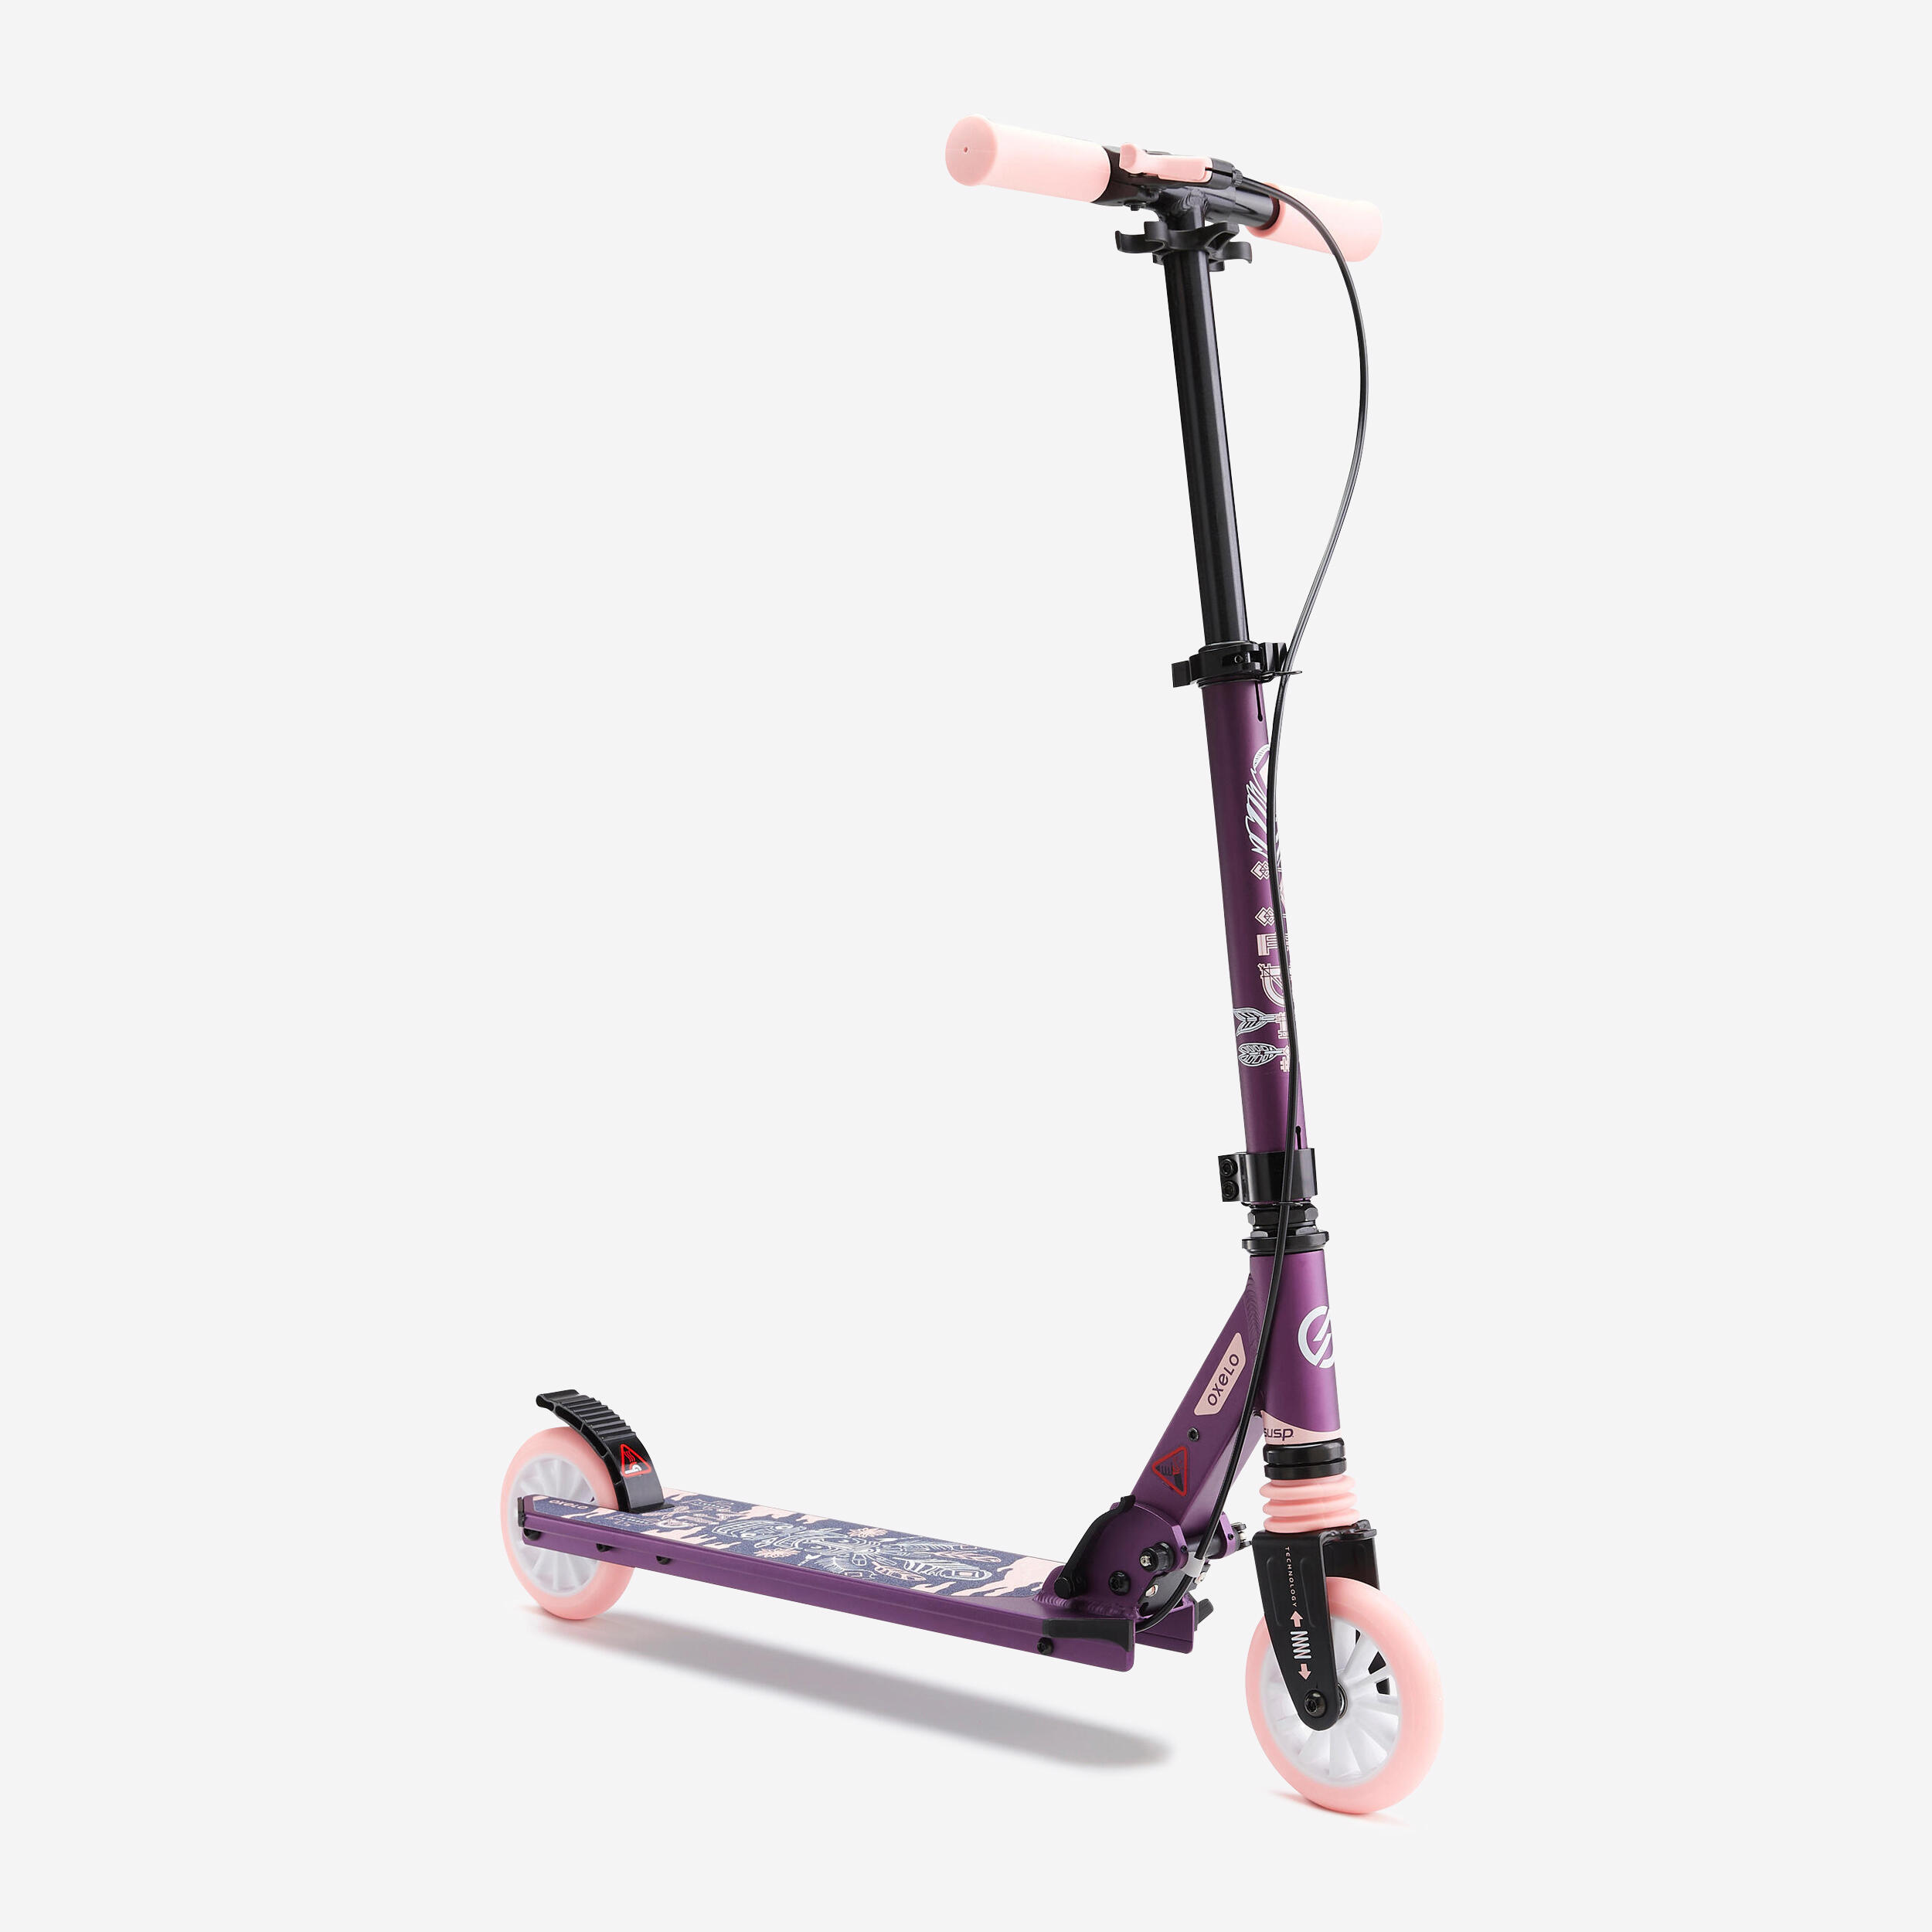 Mid 5 Kids' Scooter with Handlebar Brake and Suspension - Purple 1/9